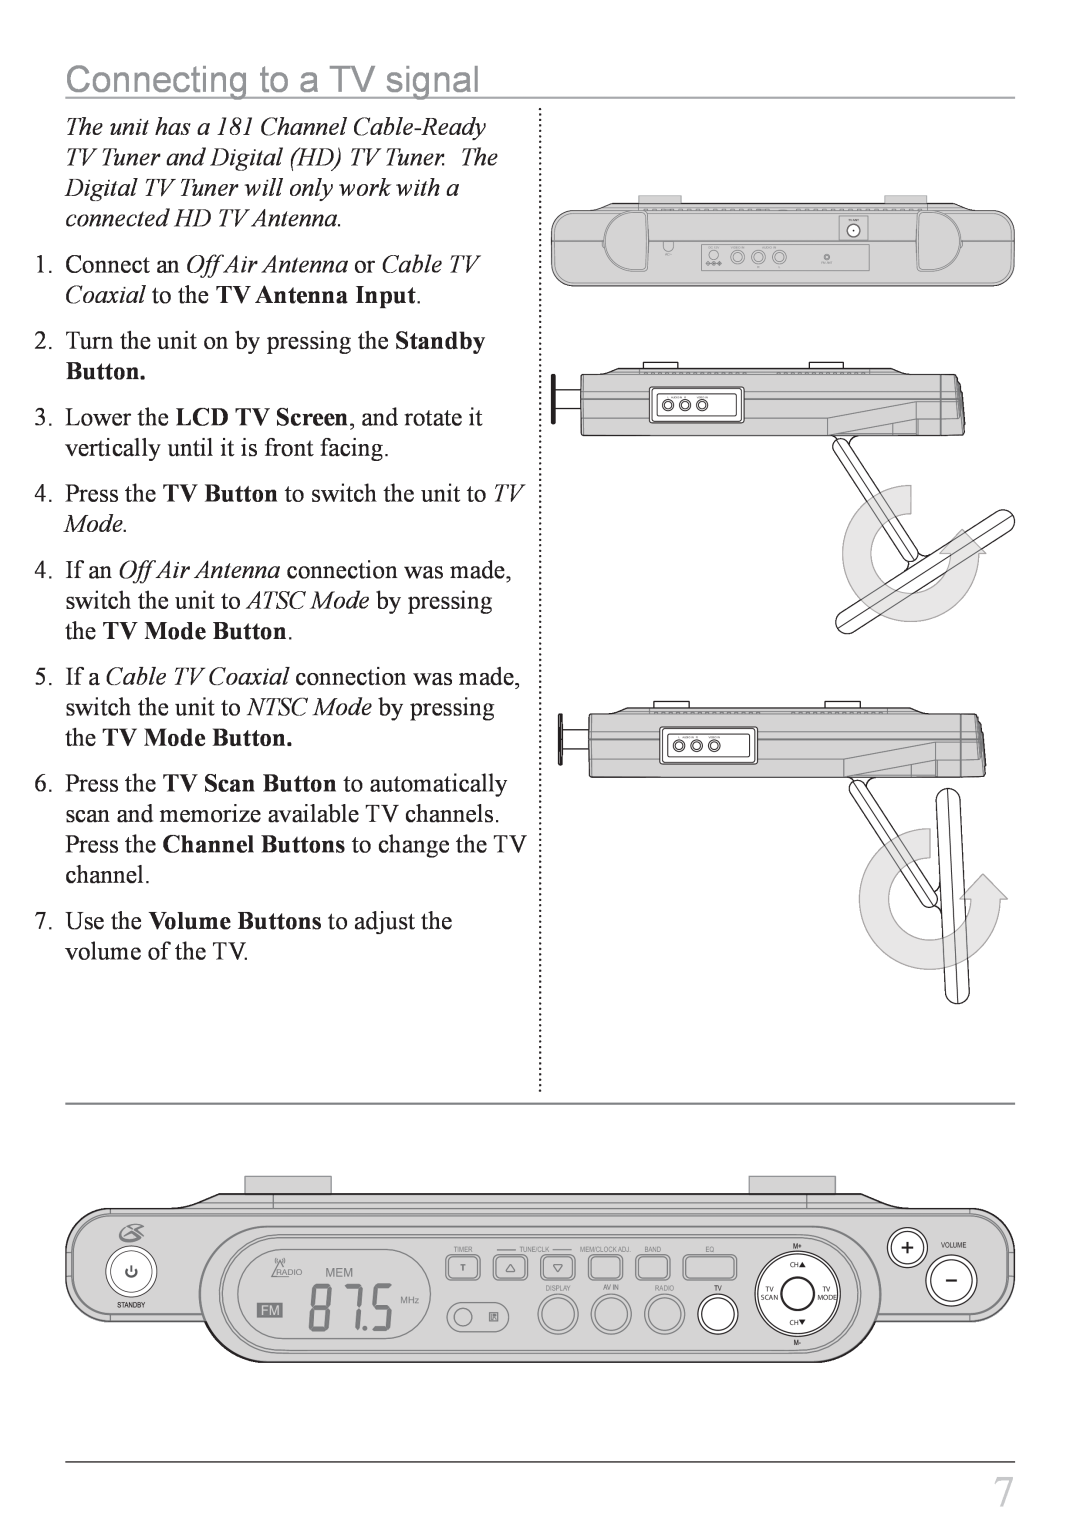 GPX KCL8807DT instruction manual Connecting to a TV signal, Button 